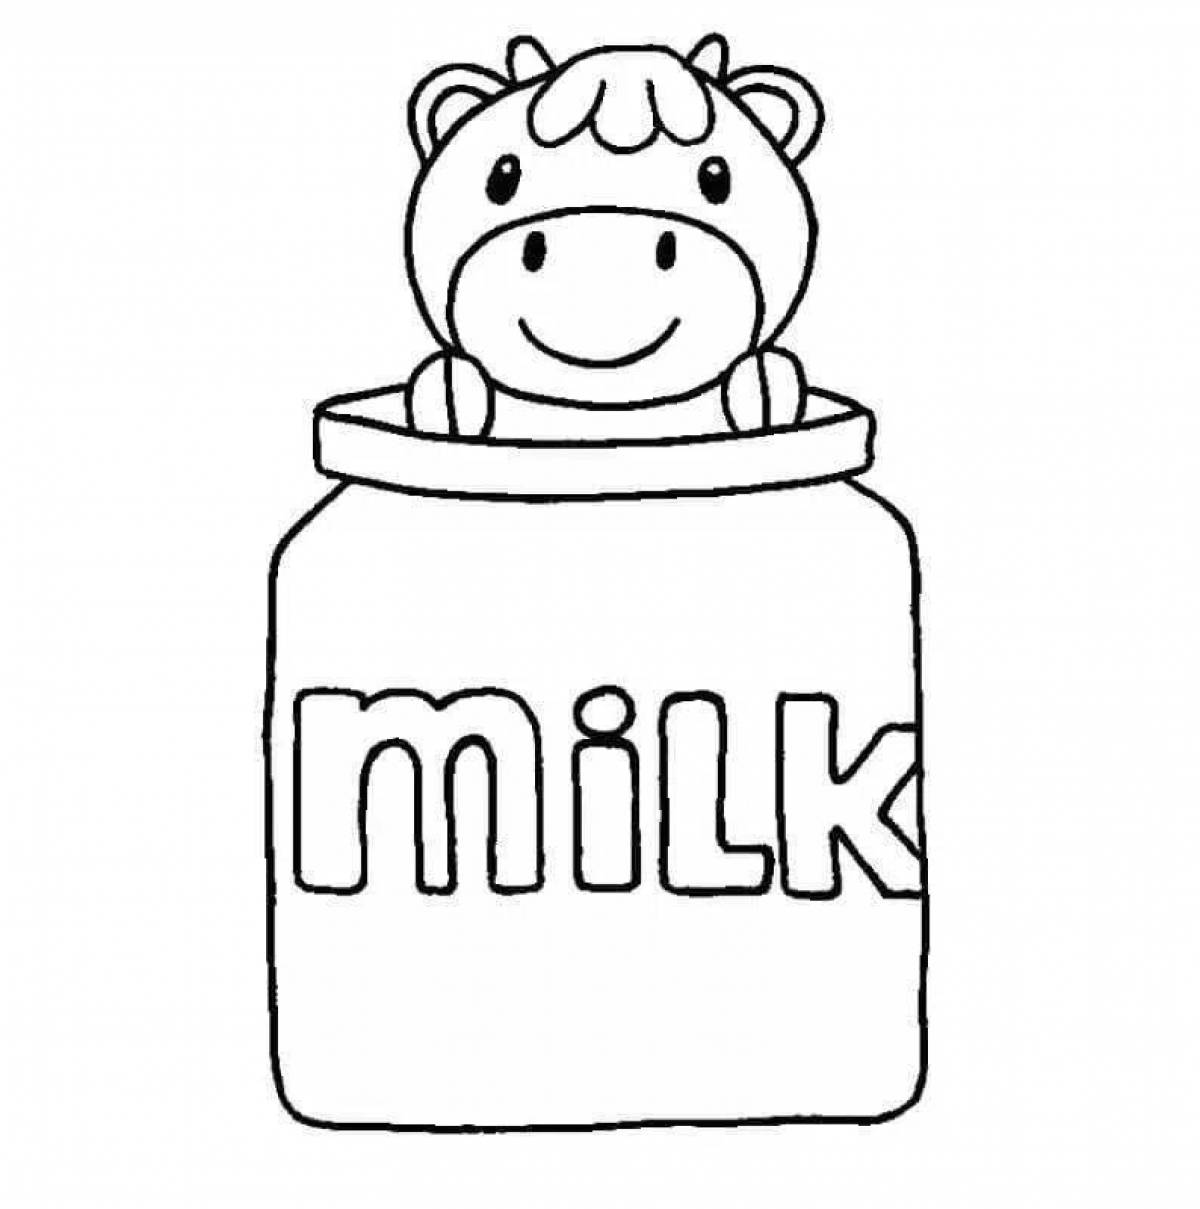 Dochimilk live coloring page